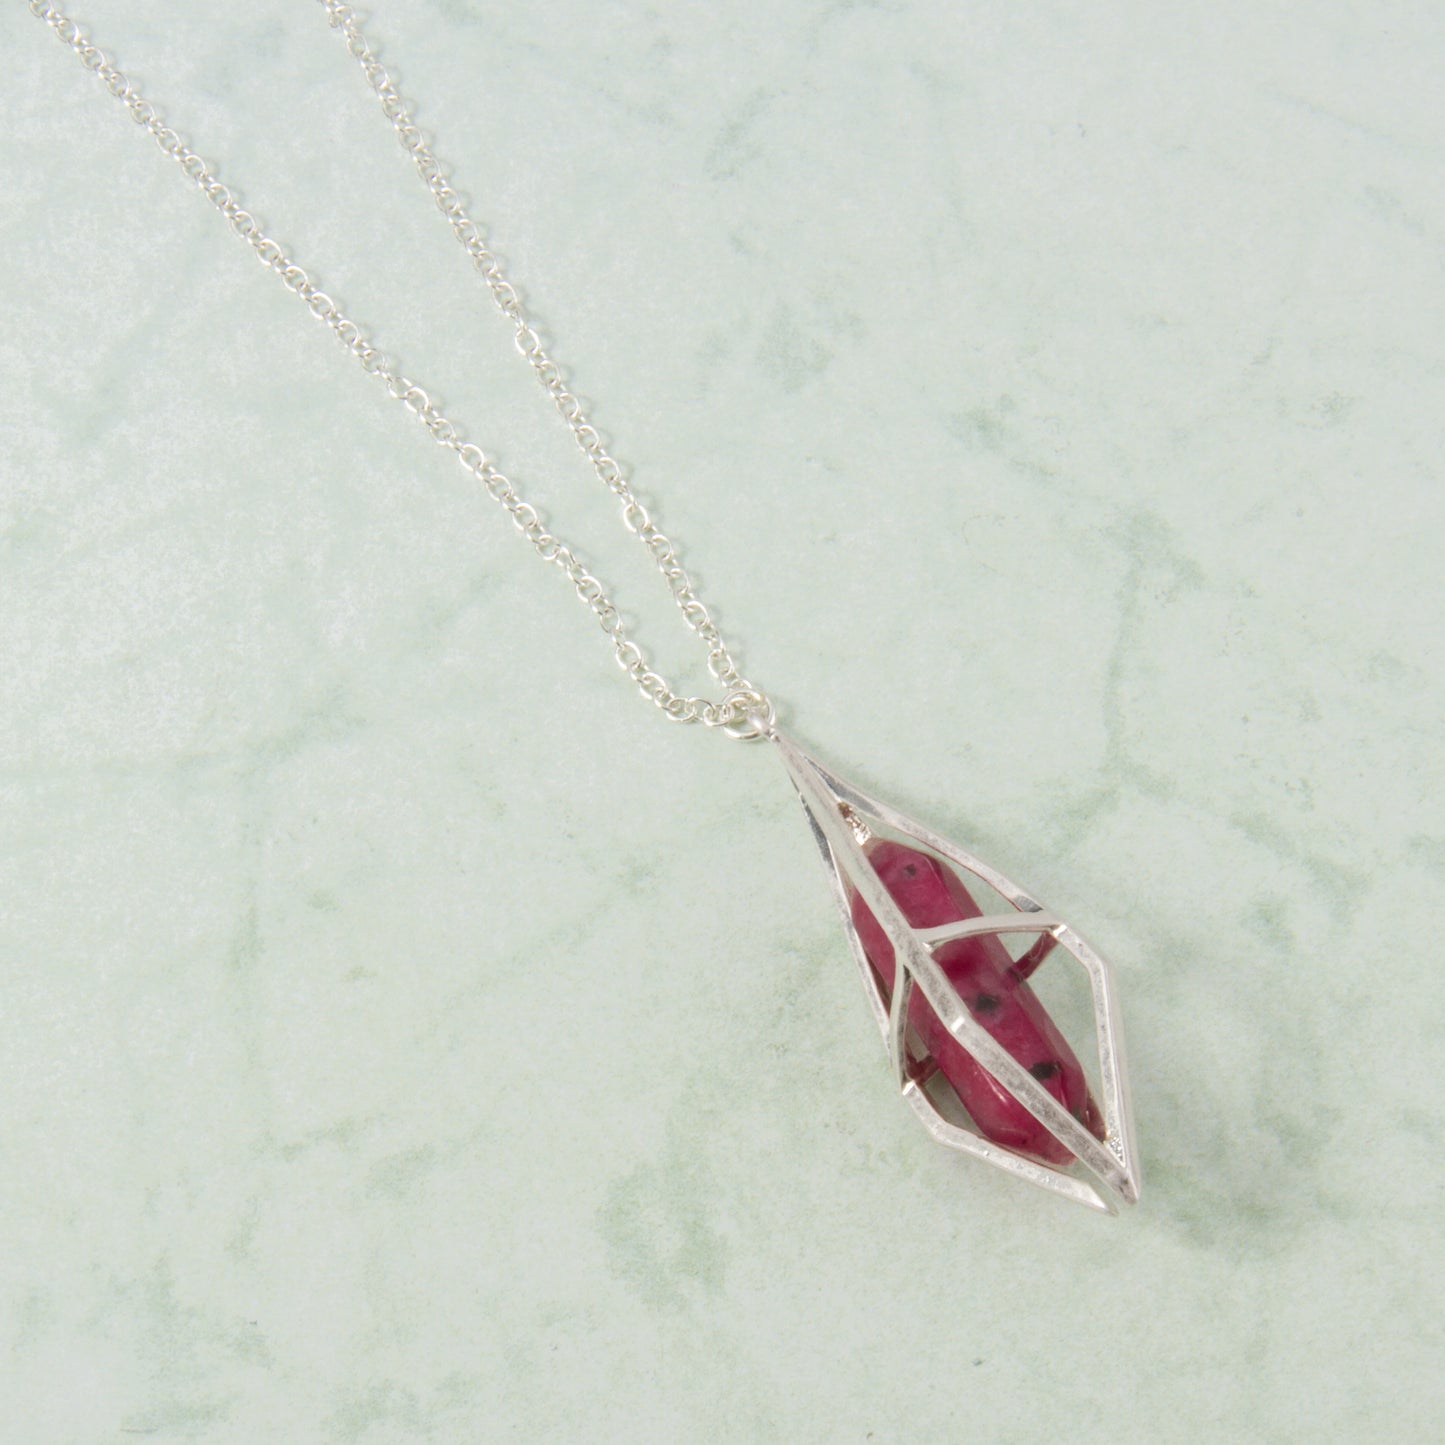 N3282-RD 24" Red Stone in Silver Cage Necklace